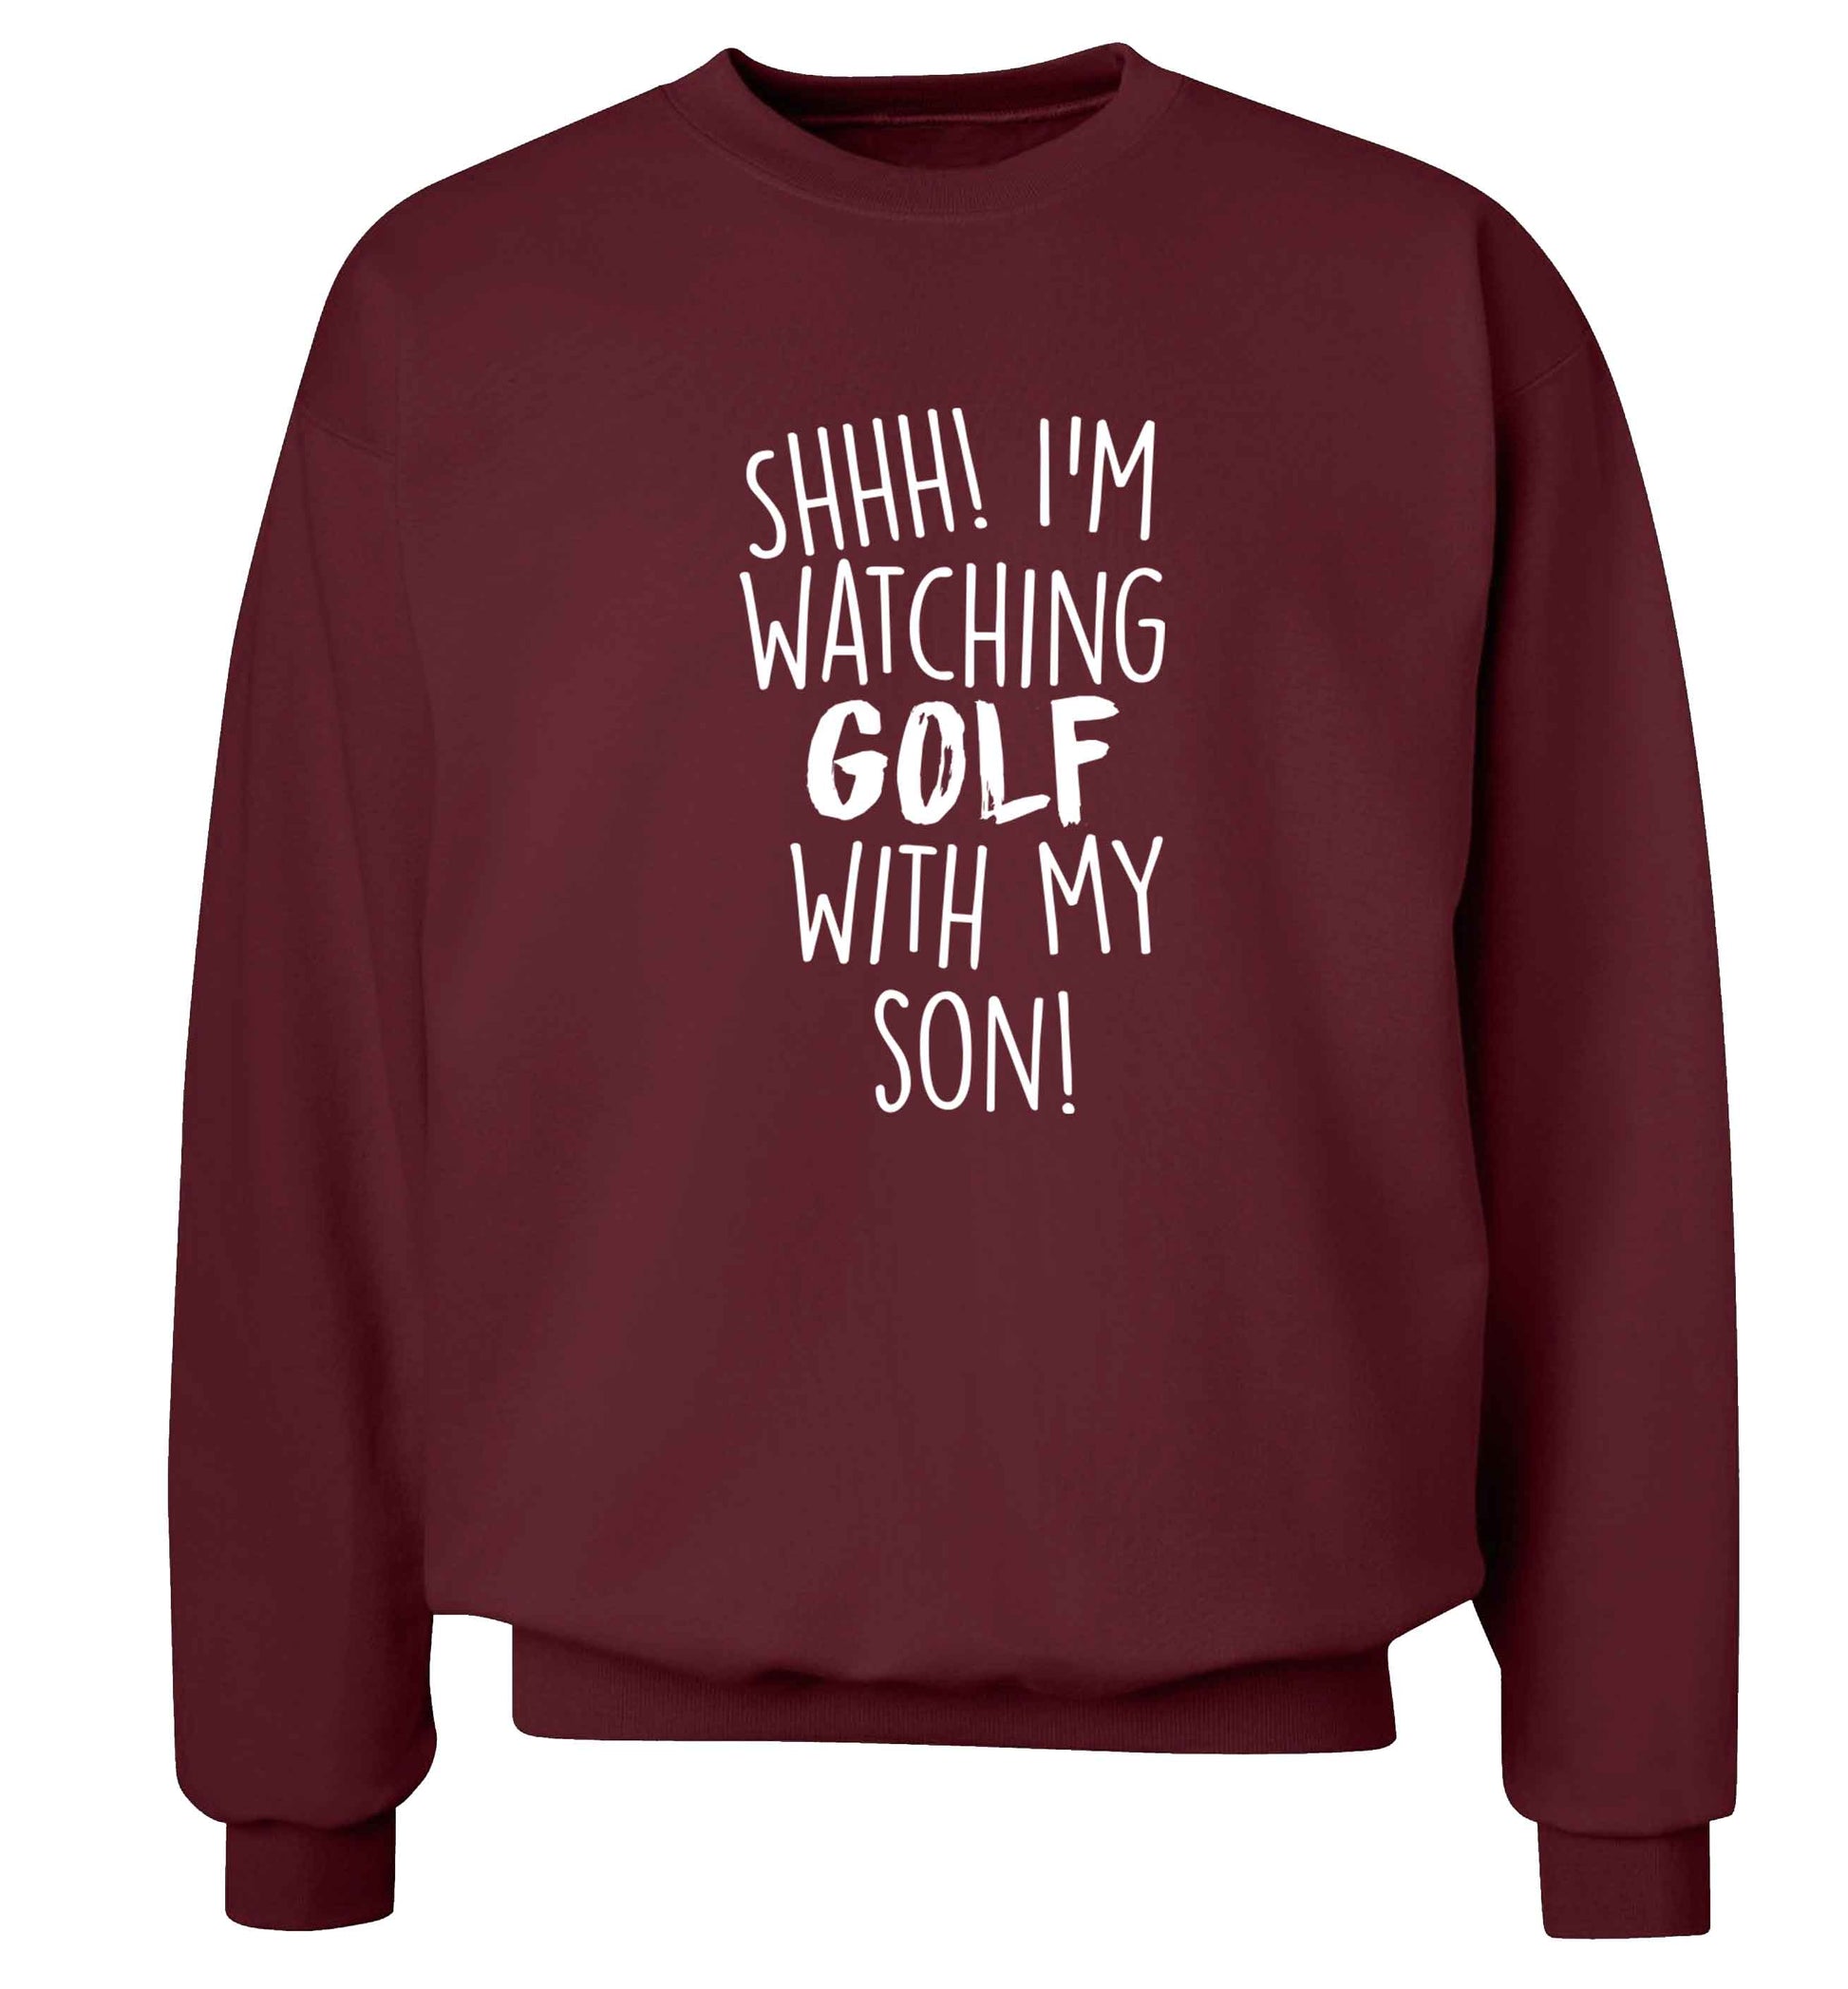 Shh I'm watching golf with my son Adult's unisex maroon Sweater 2XL